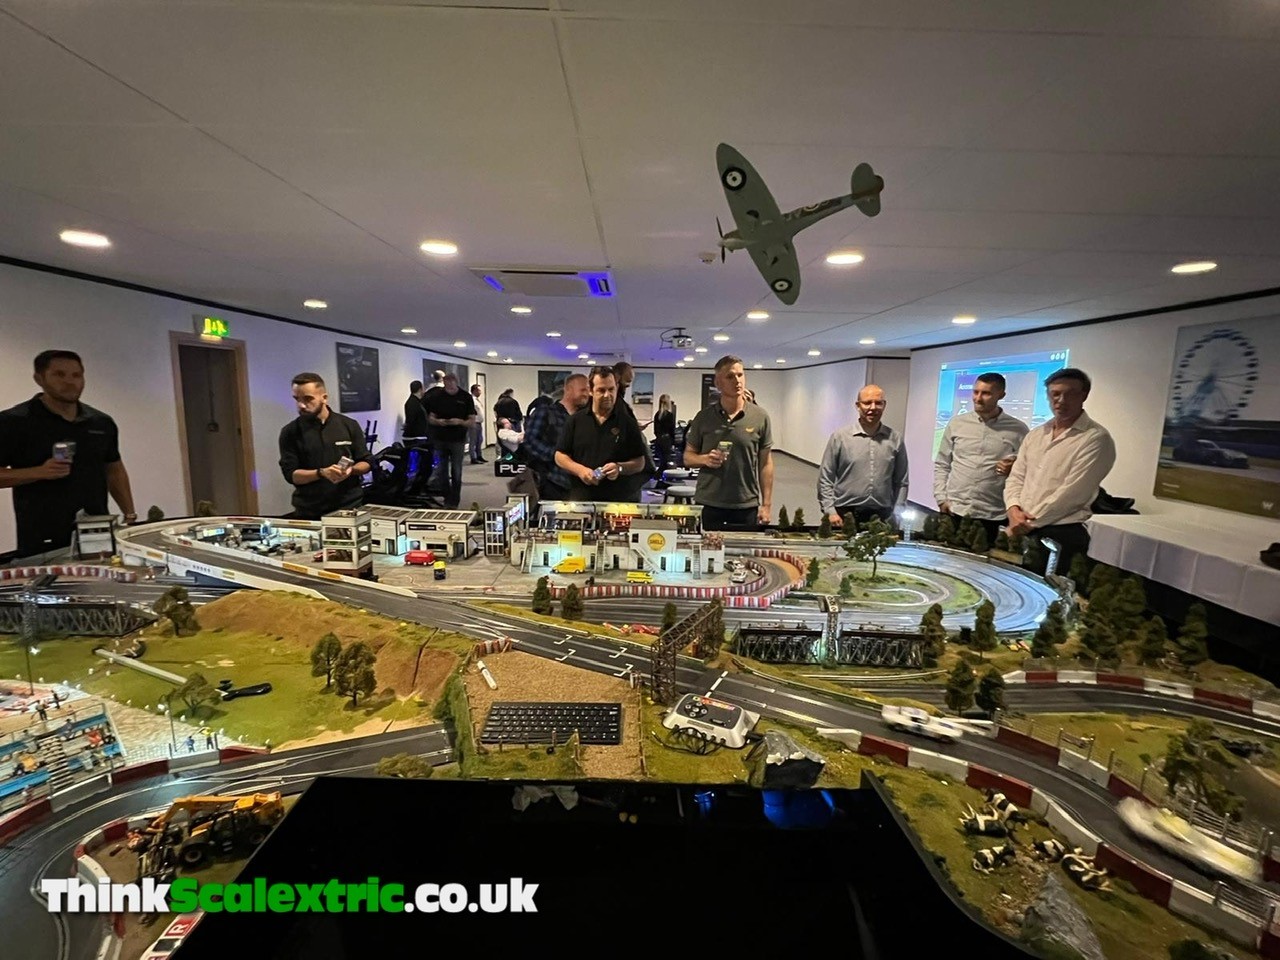 williams f1 racing corporate event giant scalextric bespoke track build